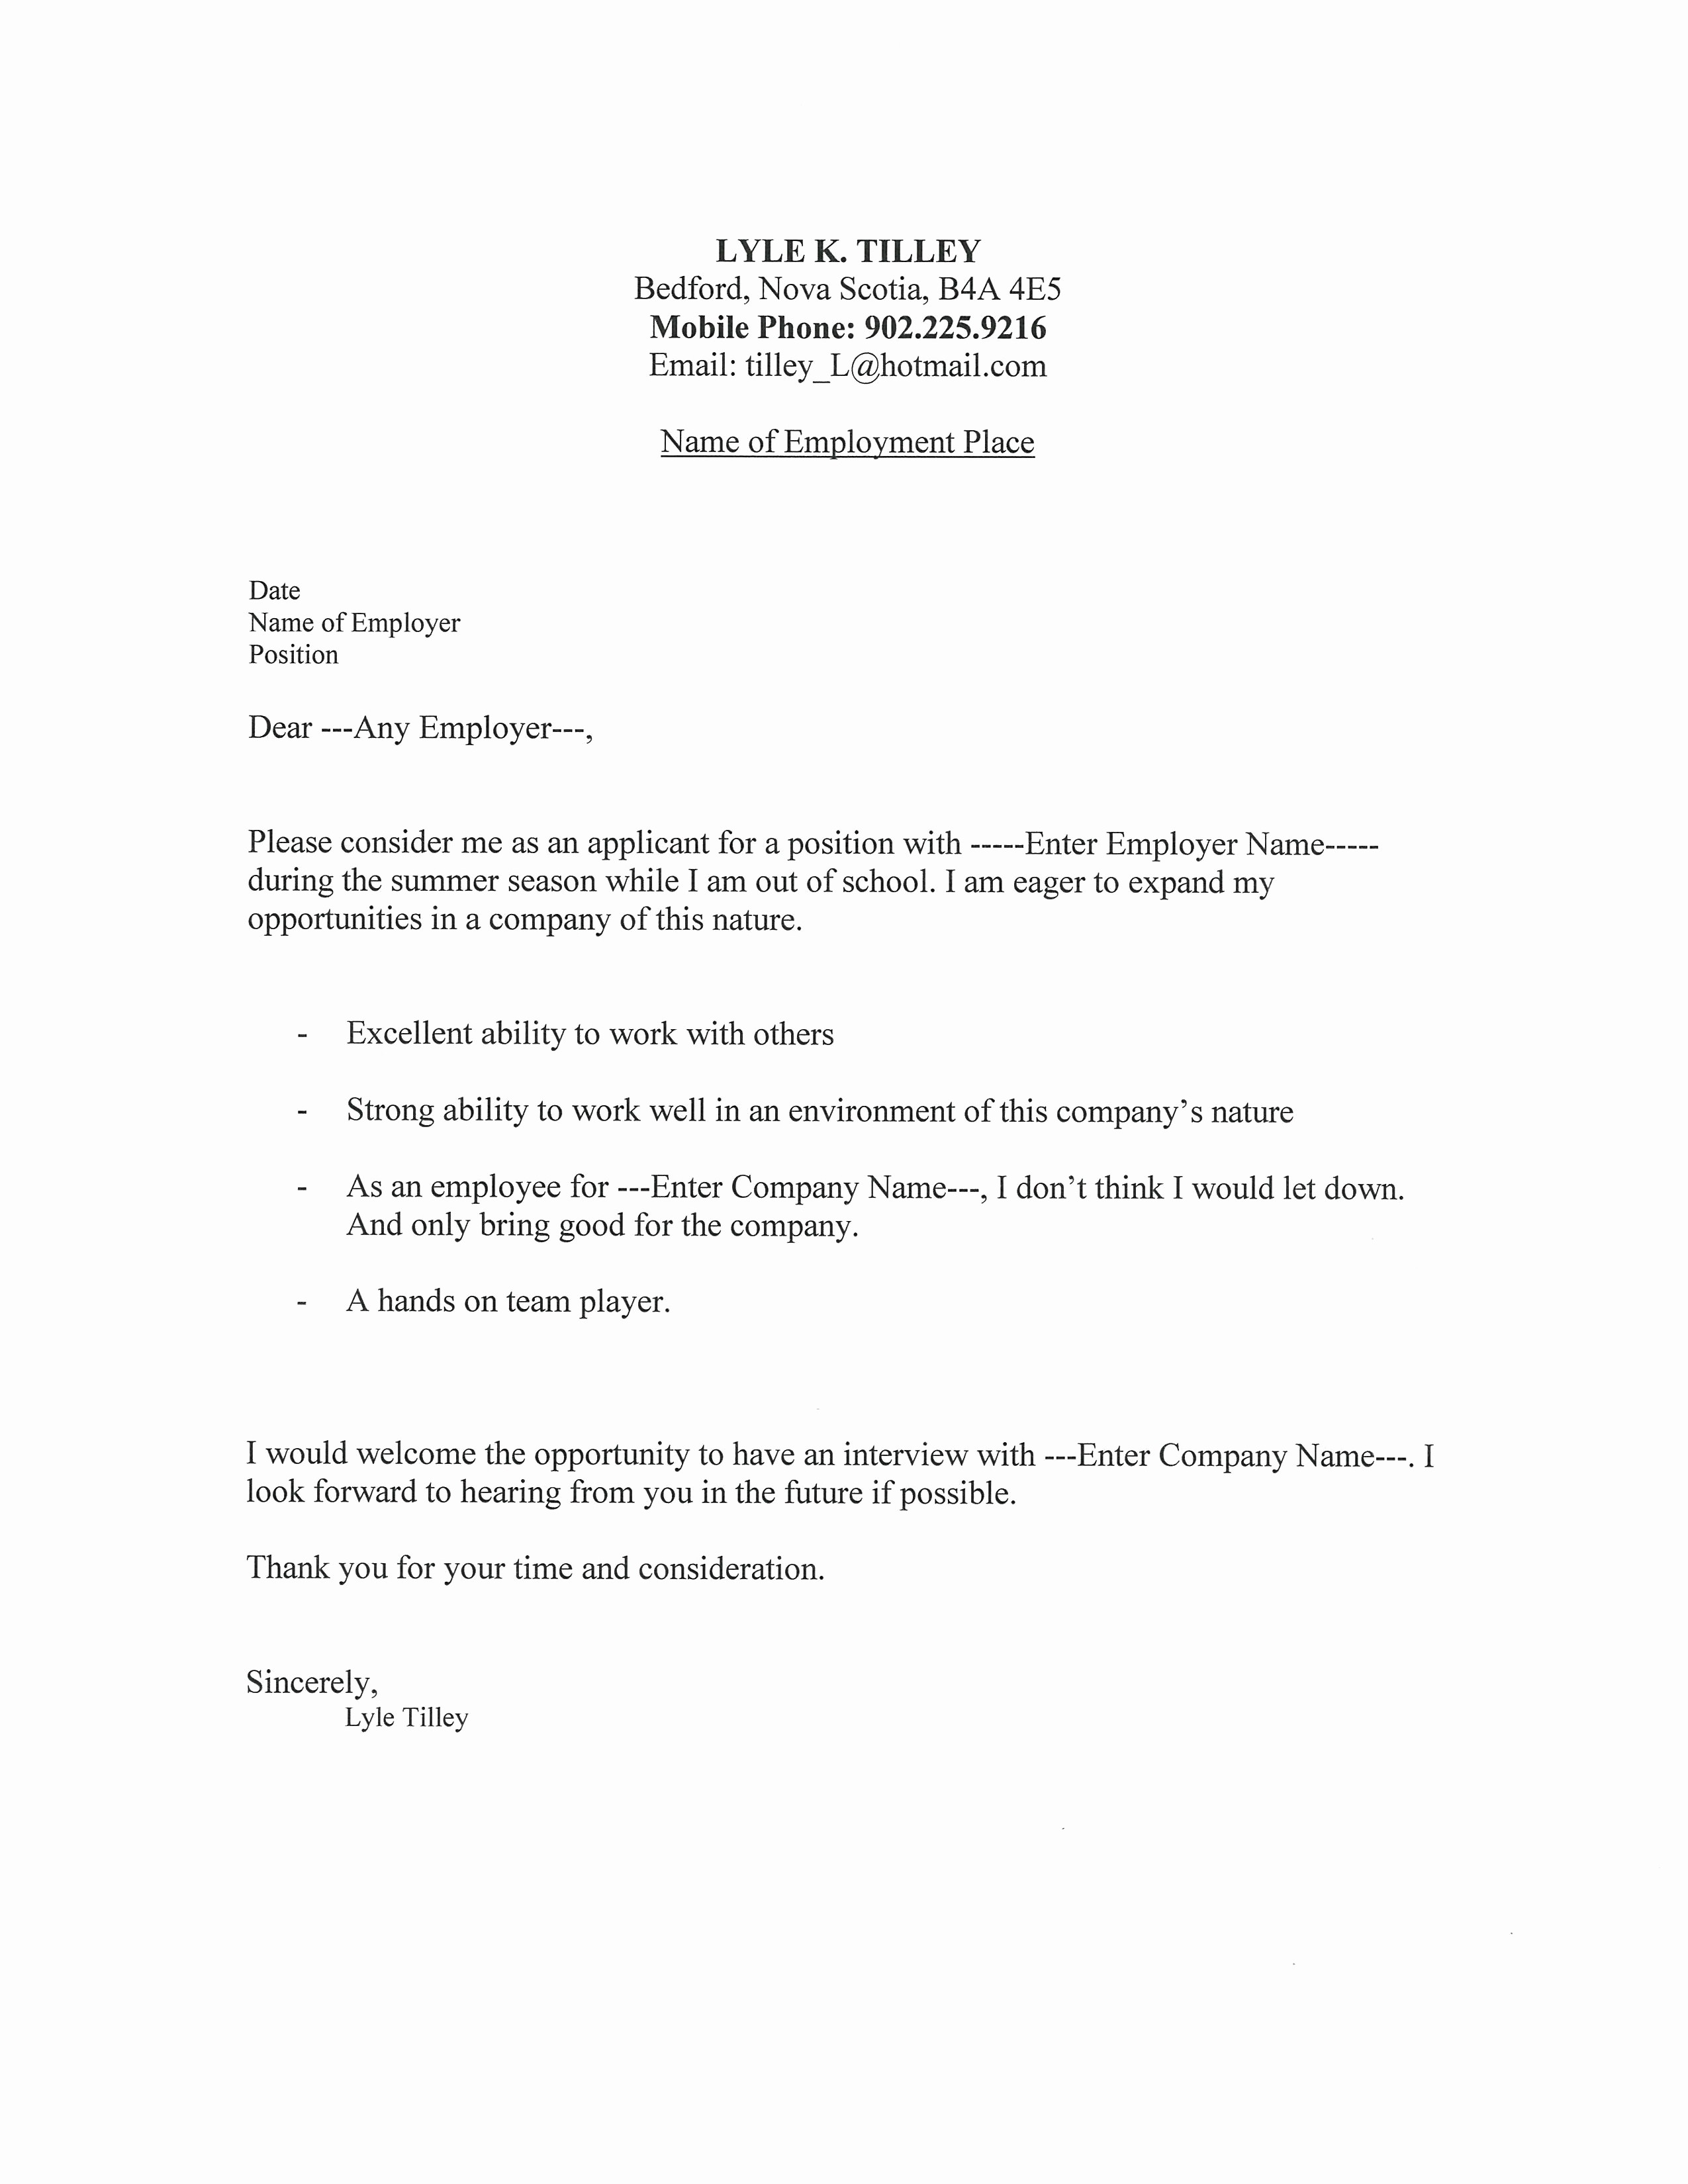 Resume Cover Letter Templates Free Inspirational Examples Cover Letter for Resume Template